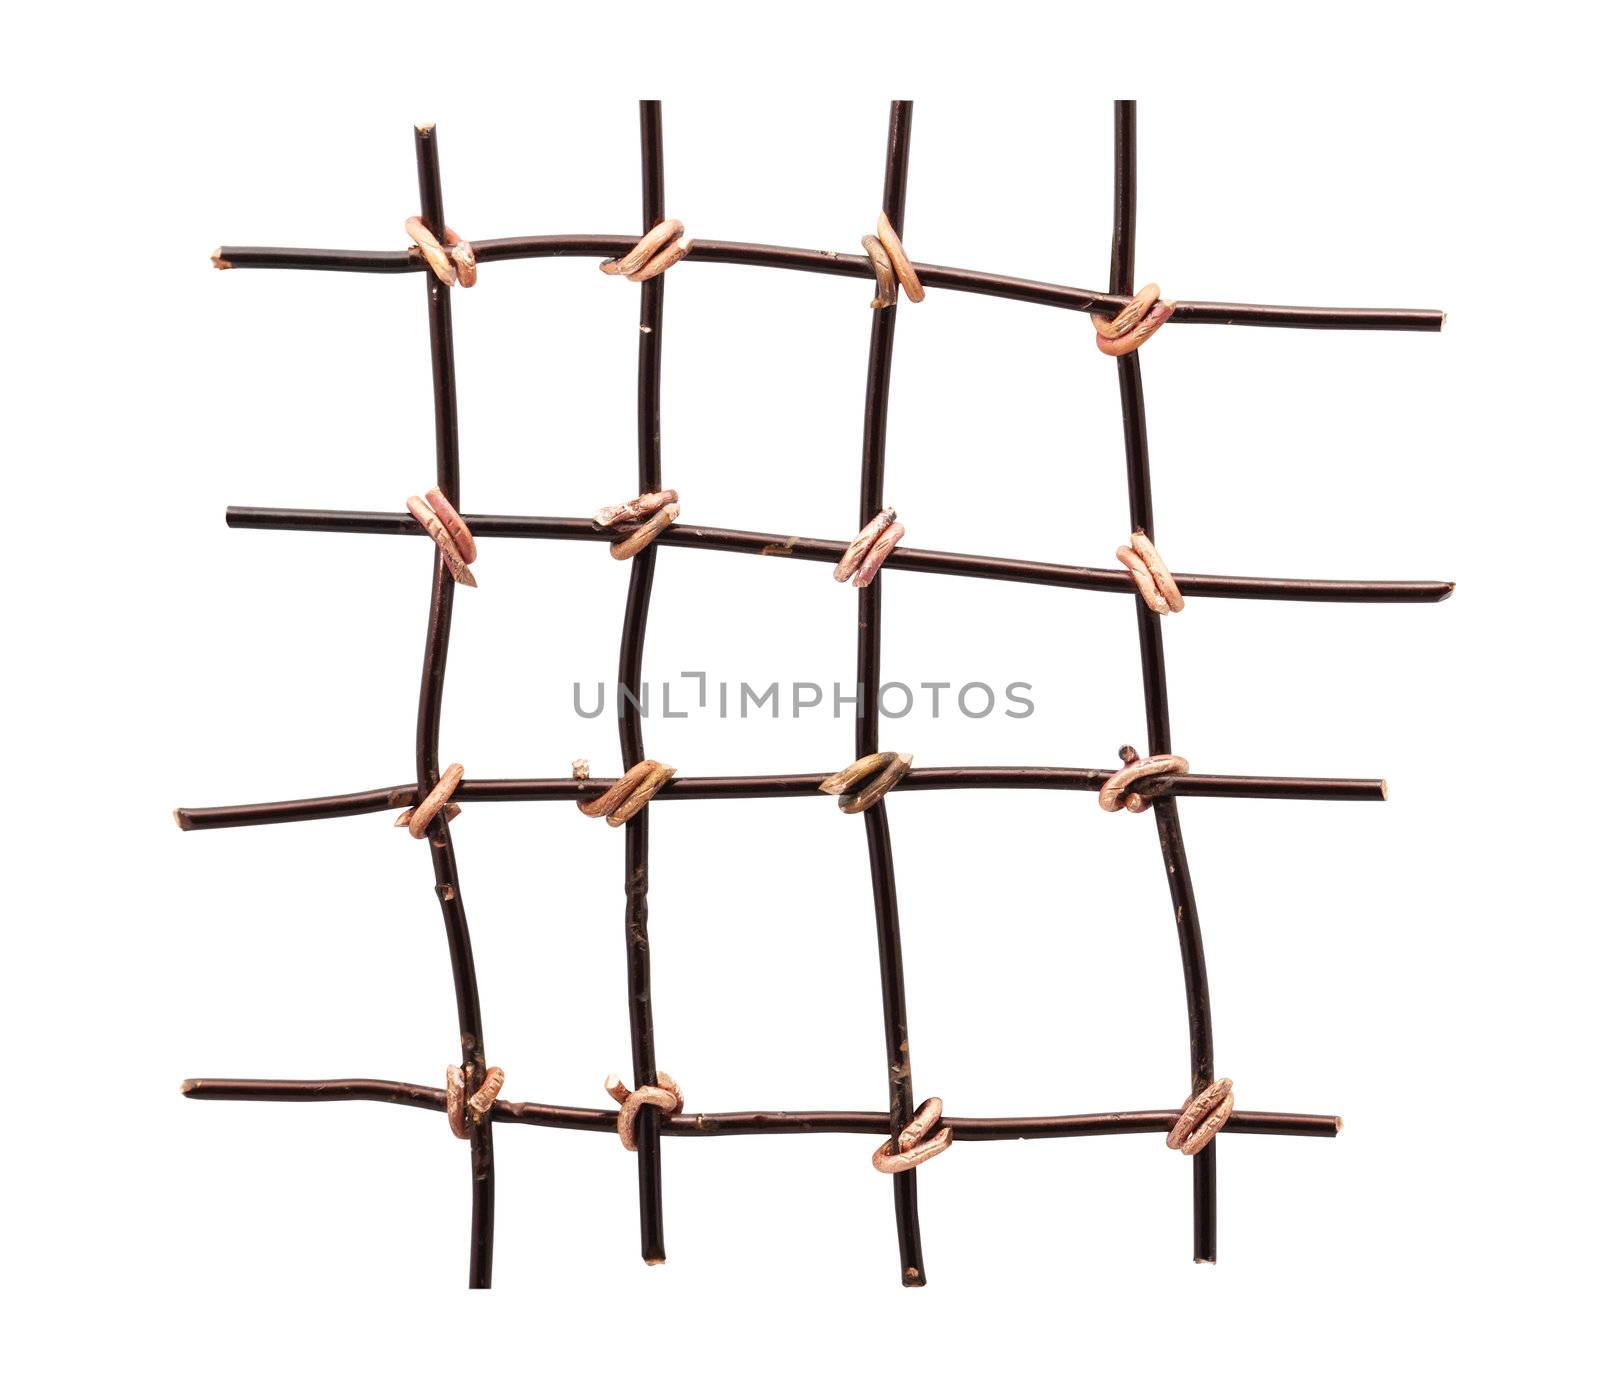 Grate made from brass wire isolated on white background with clipping path